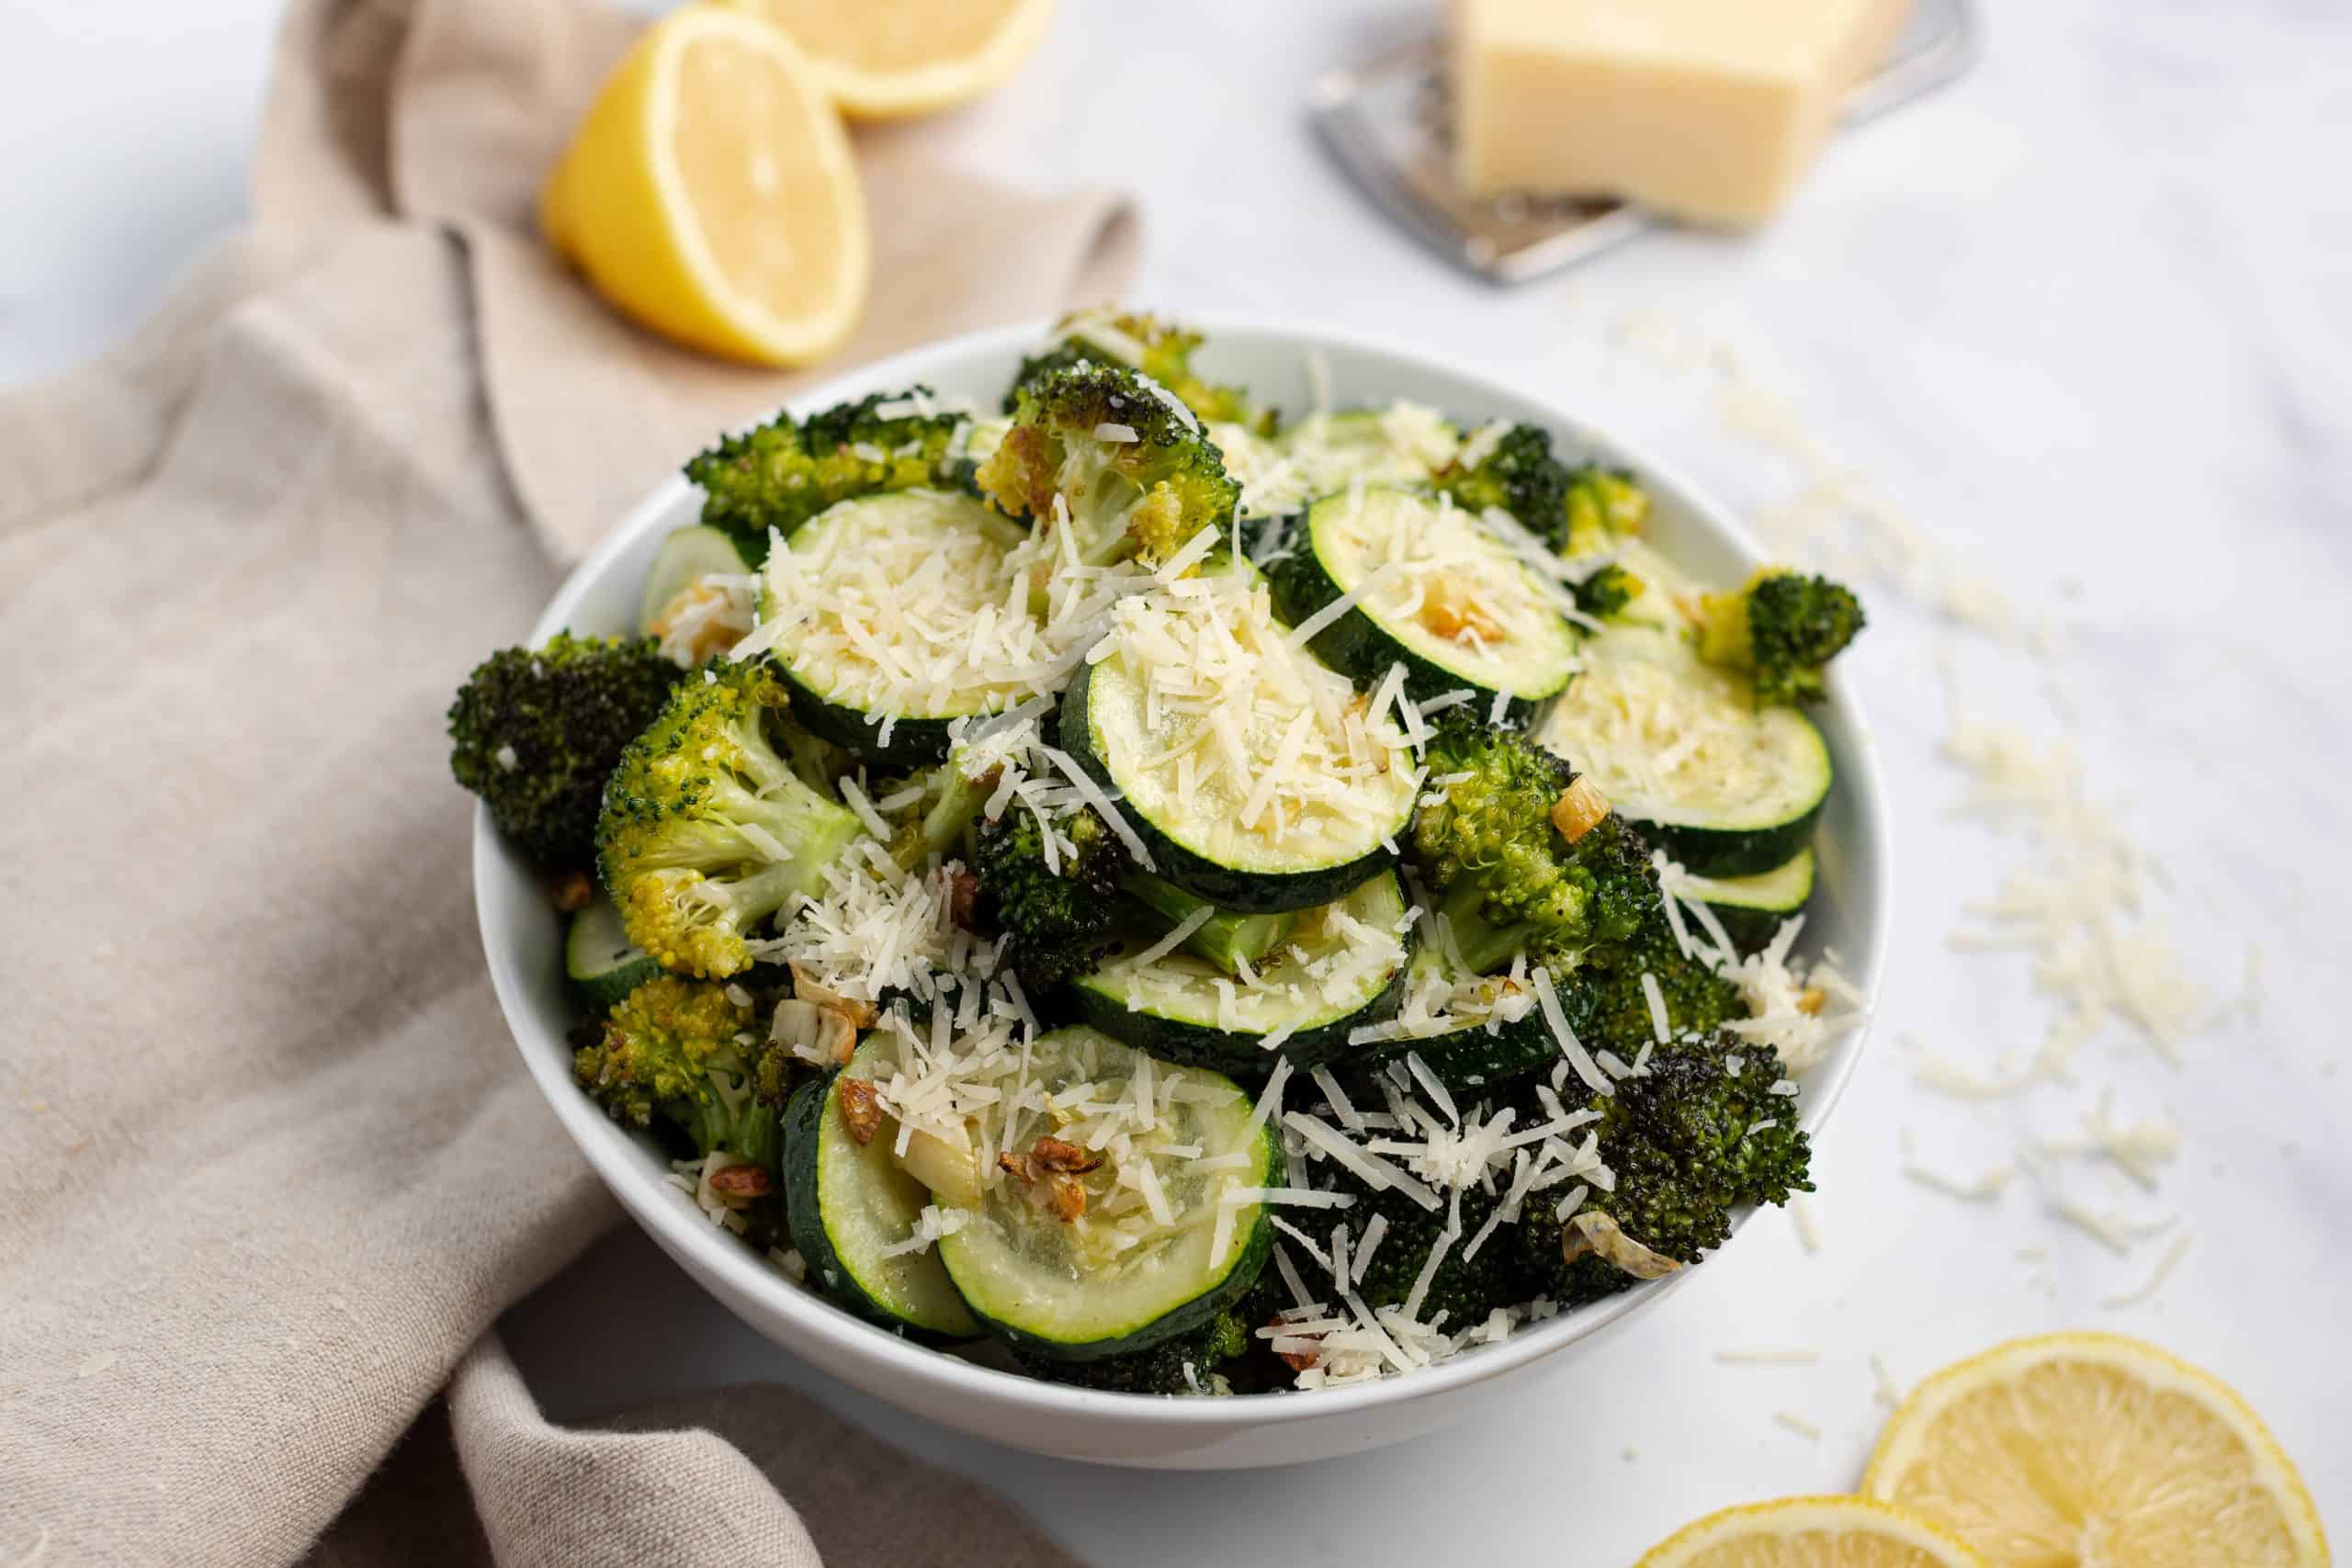 Bowl of roasted broccoli and zucchini topped with lemon juice and parmesan cheese.